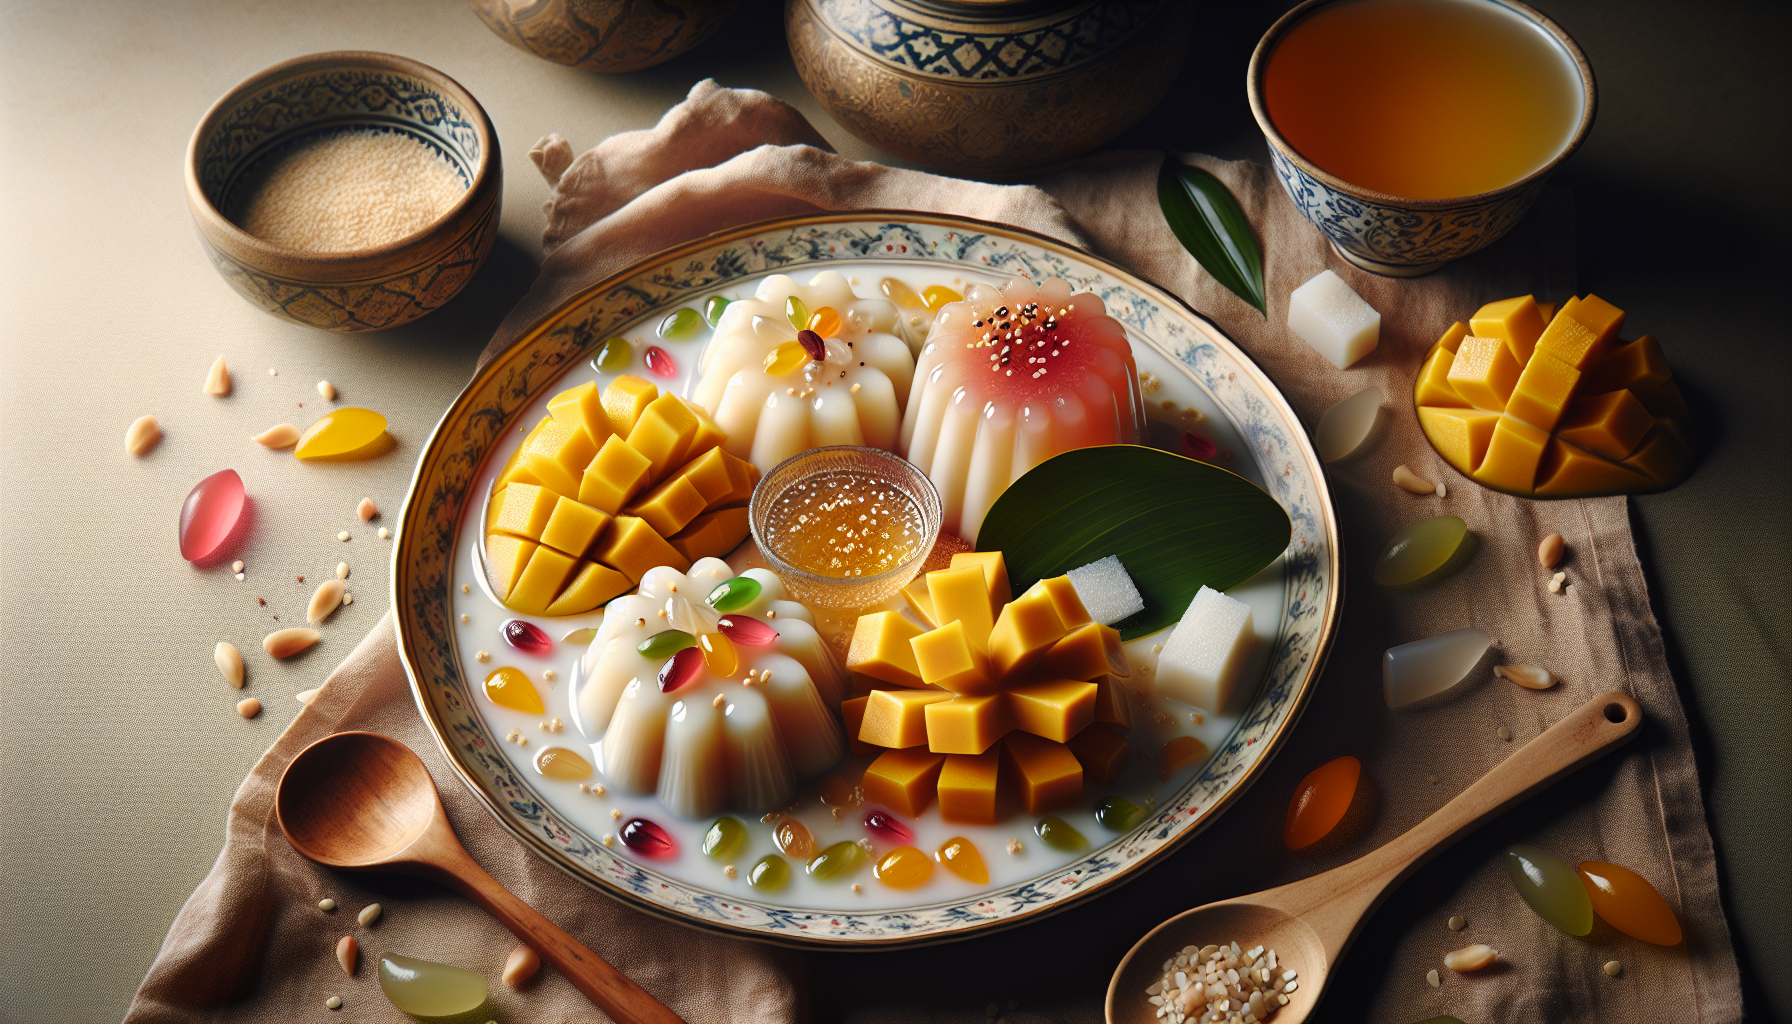 share your comforting thai dessert recipe for a sweet escape